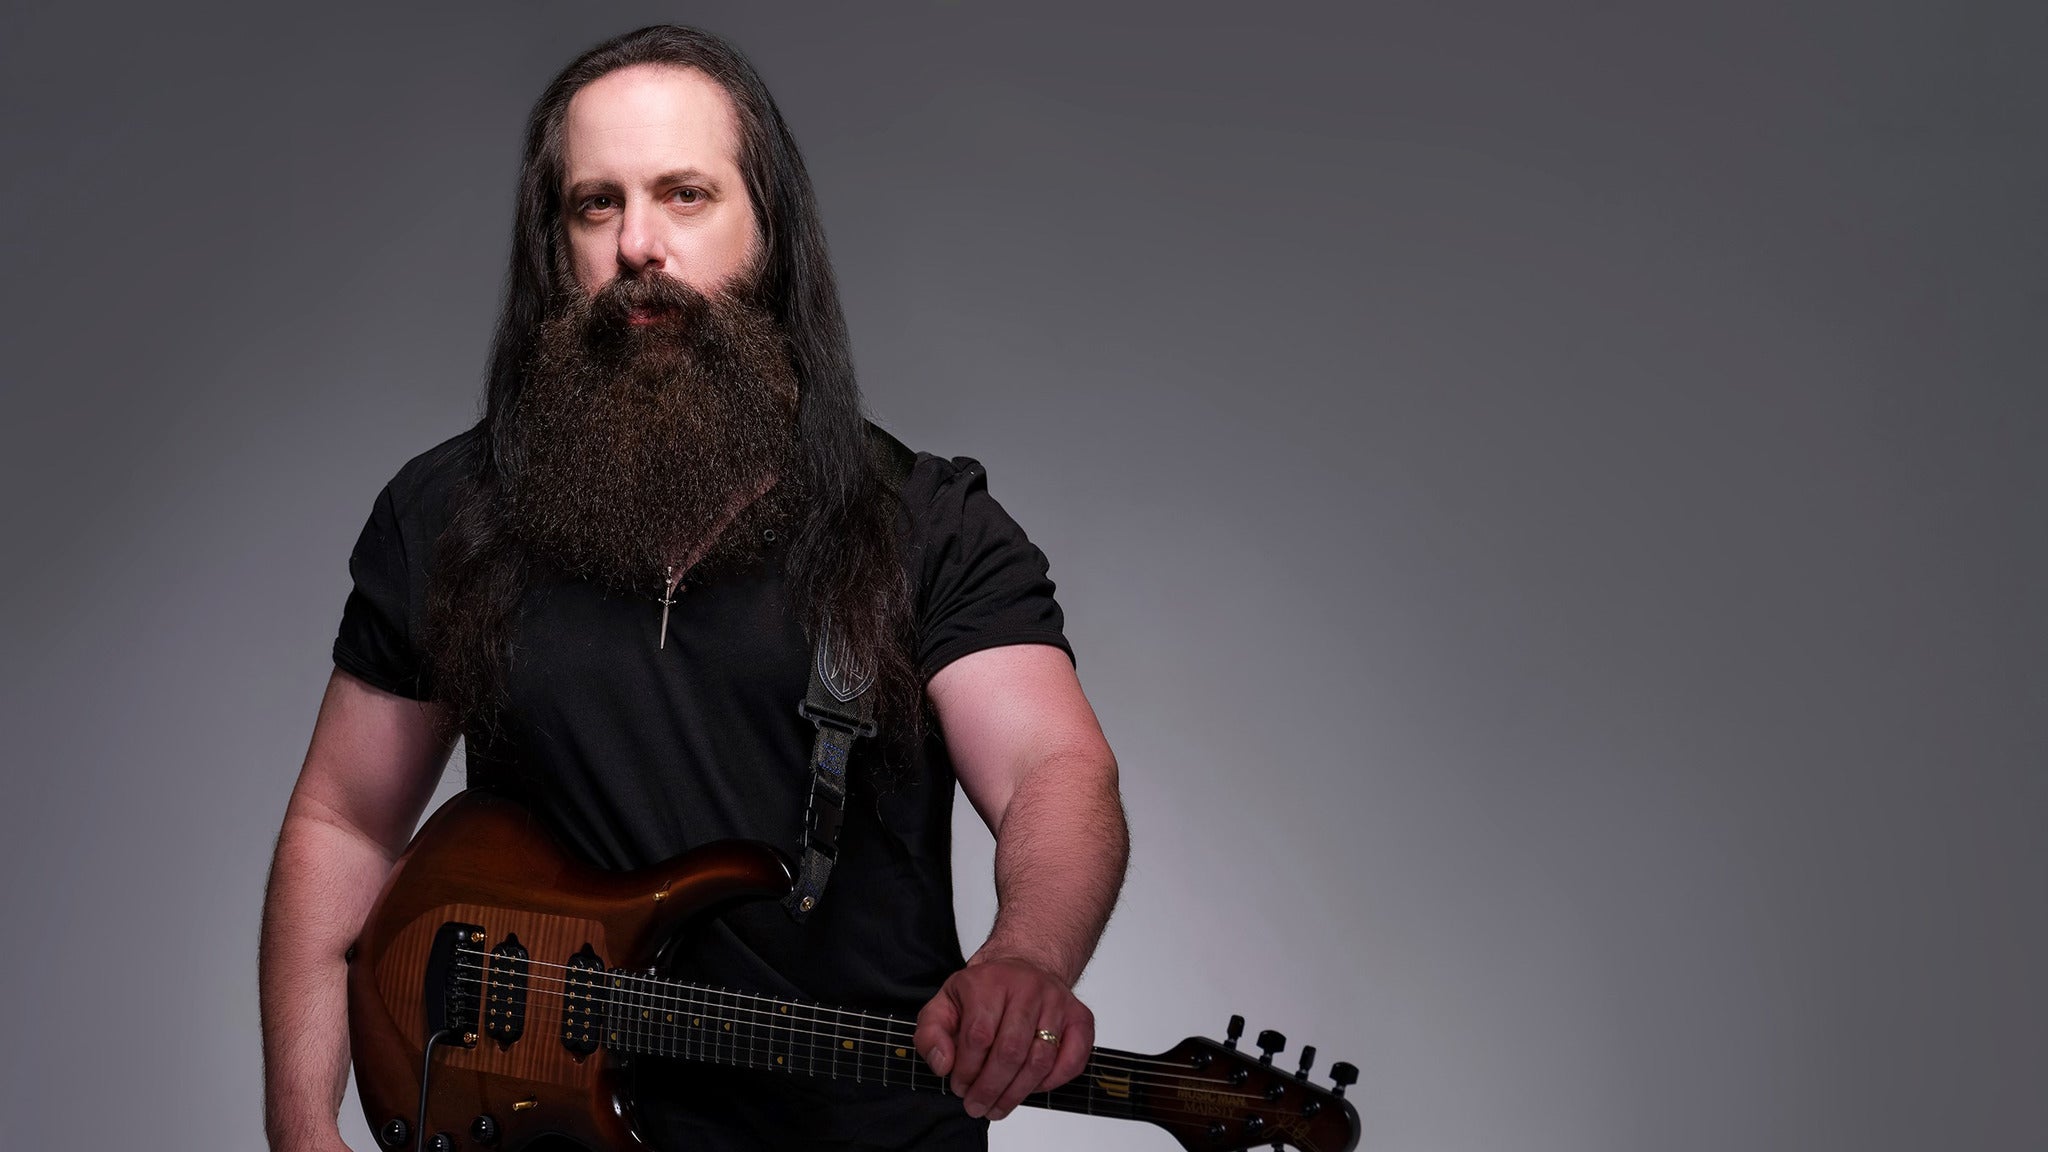 John Petrucci With Special Guests: Meanstreak presale password